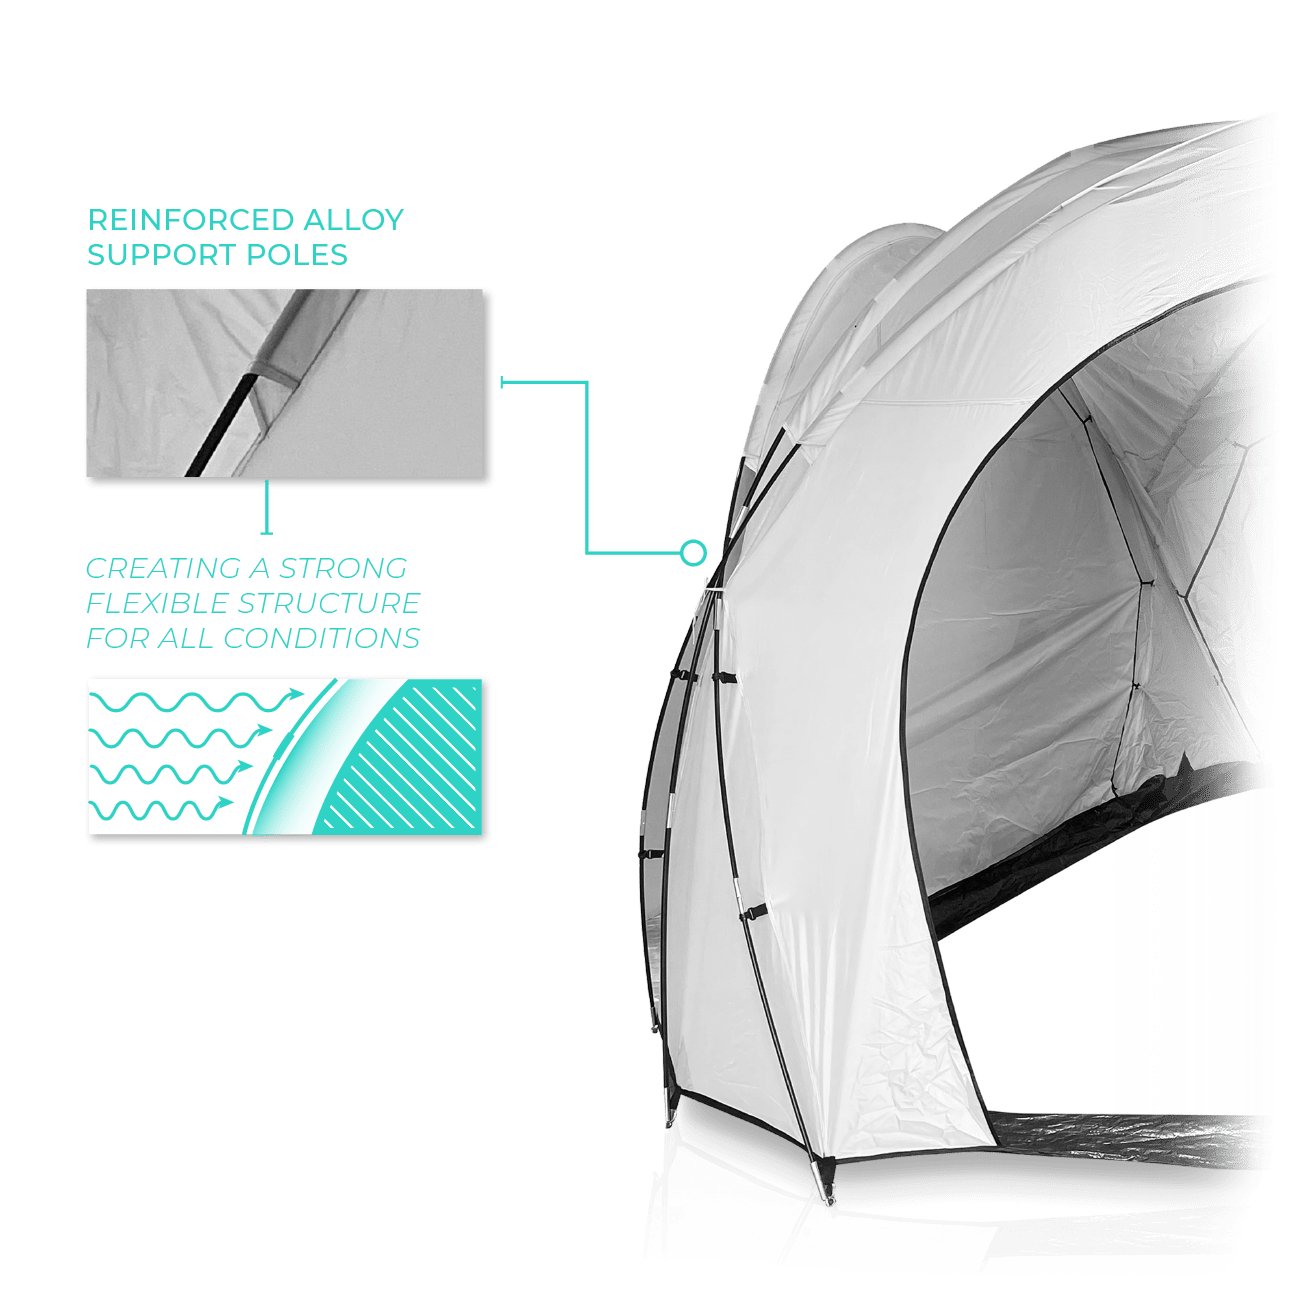 Wave Spa Dome Tent, Multi-Purpose Gazebo, Tent, Shelter - Wave Spas Inflatable, foam Hot Tubs